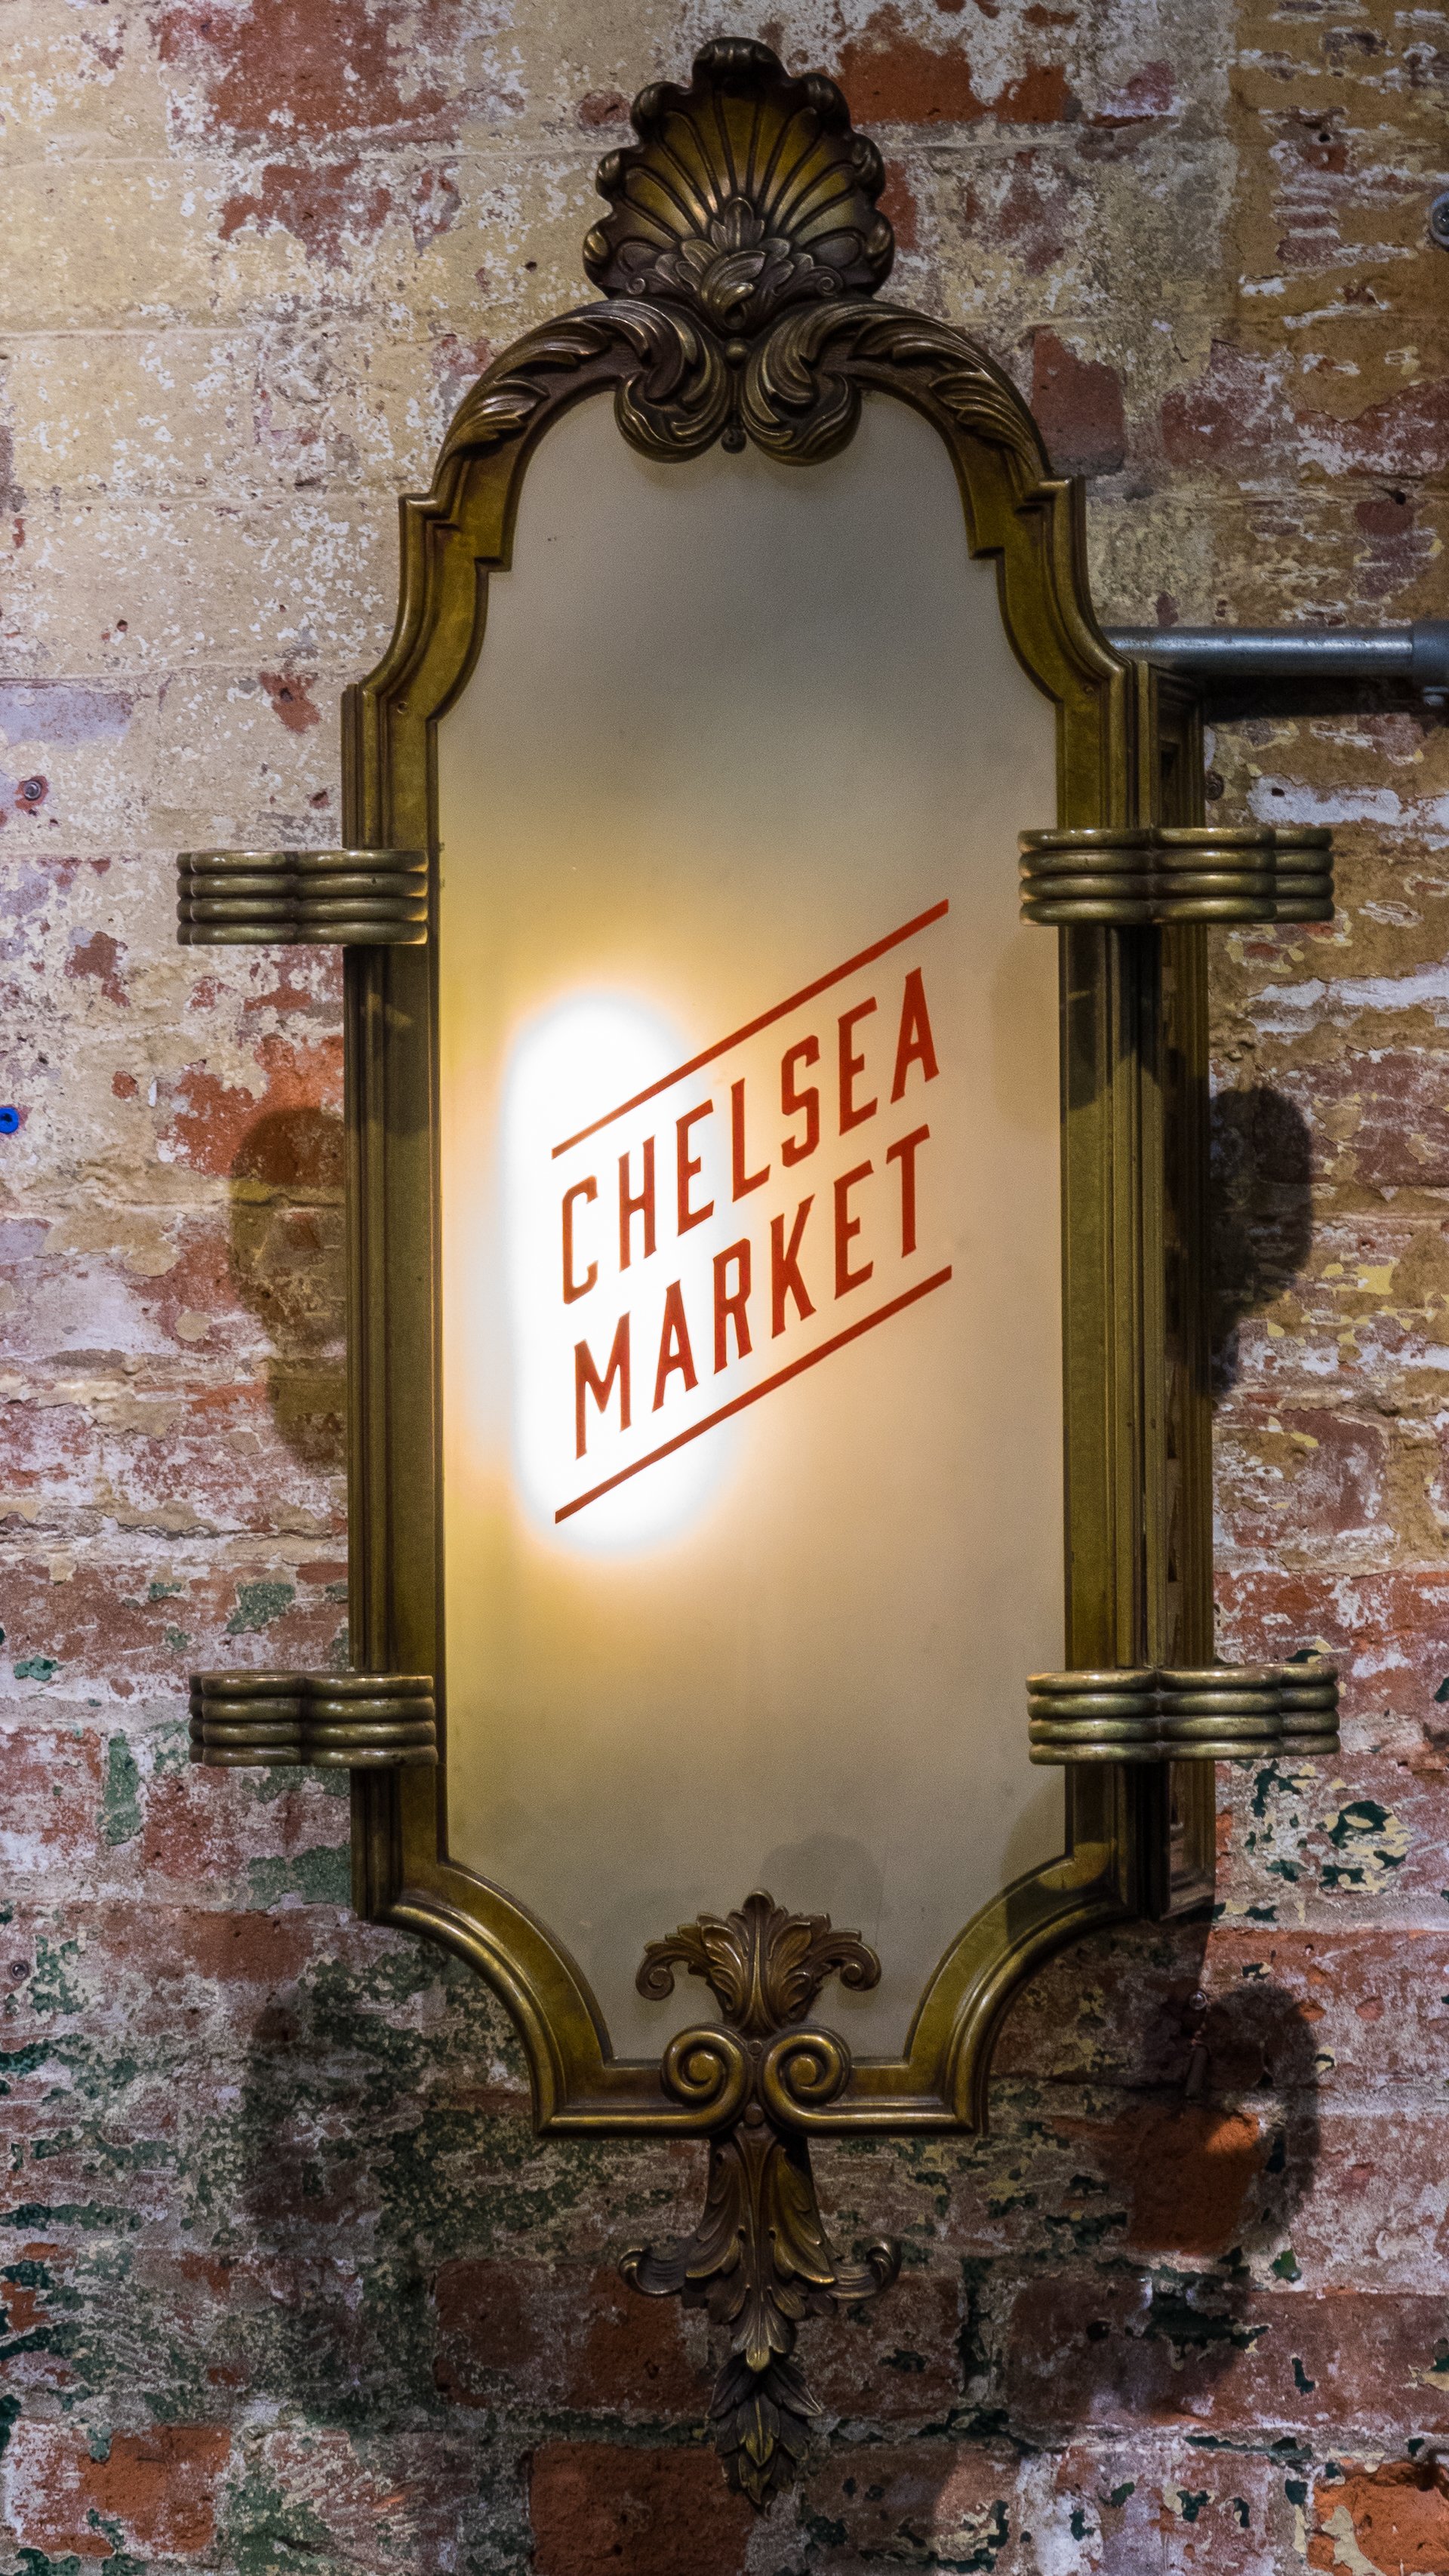  It wouldn’t be a trip to New York without a visit to Chelsea Market. 